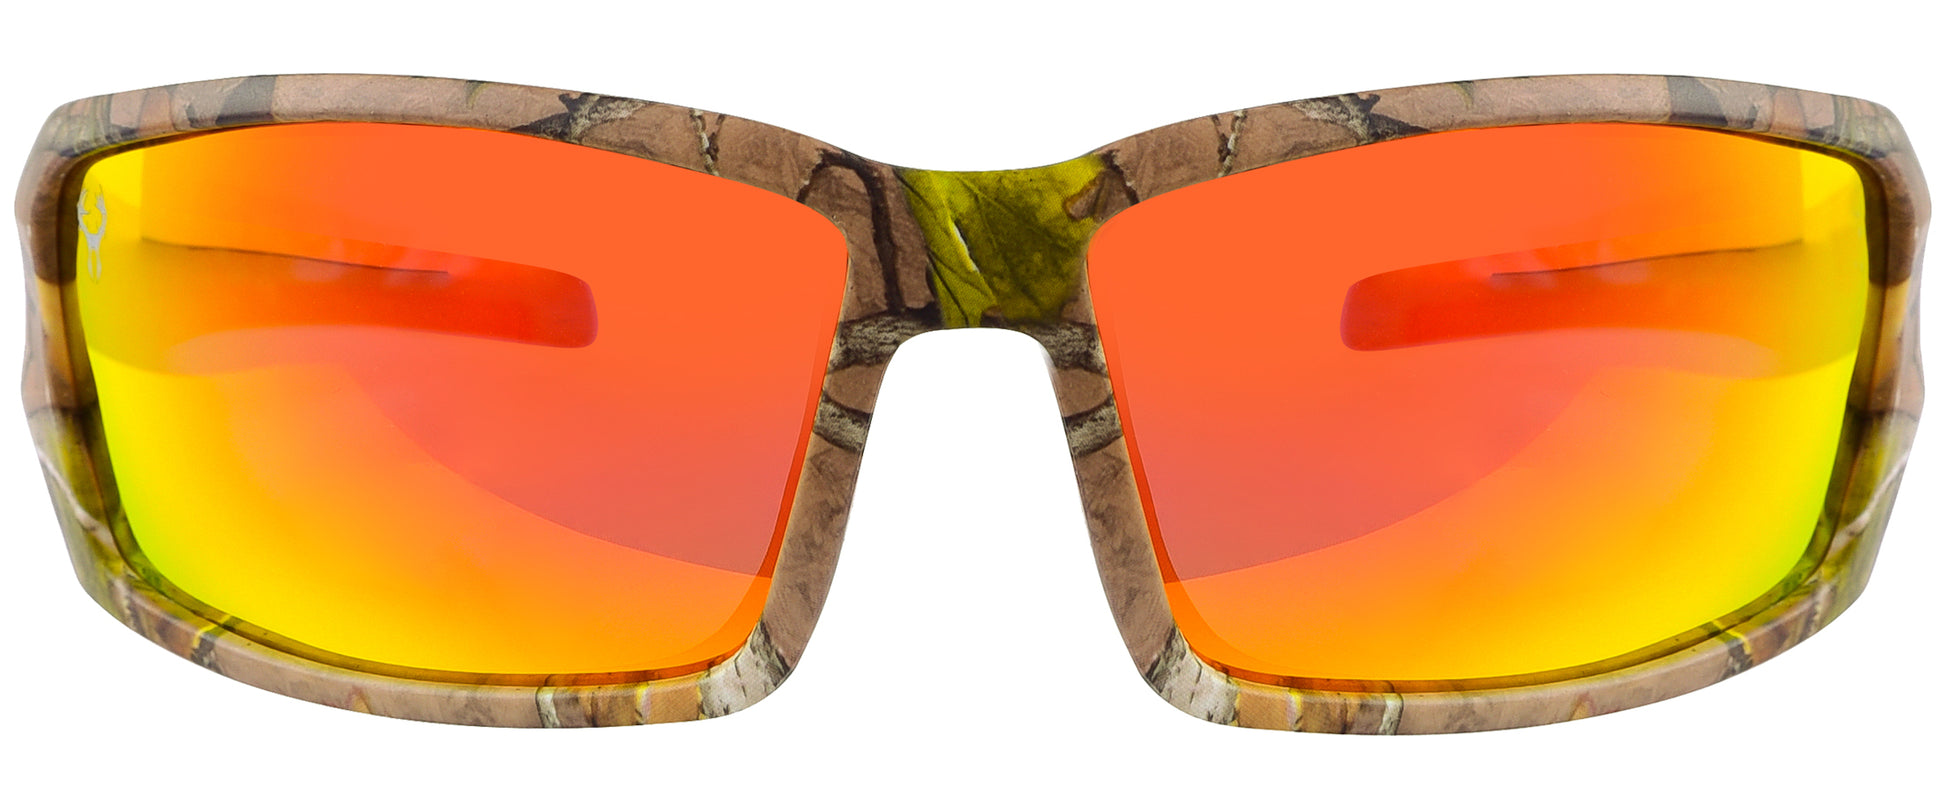 Third image: Hornz Brown Forest Camouflage Polarized Sunglasses for Men - Aquabull - Free Matching Microfiber Pouch - Brown Camo Frame - Fire Orange Lens